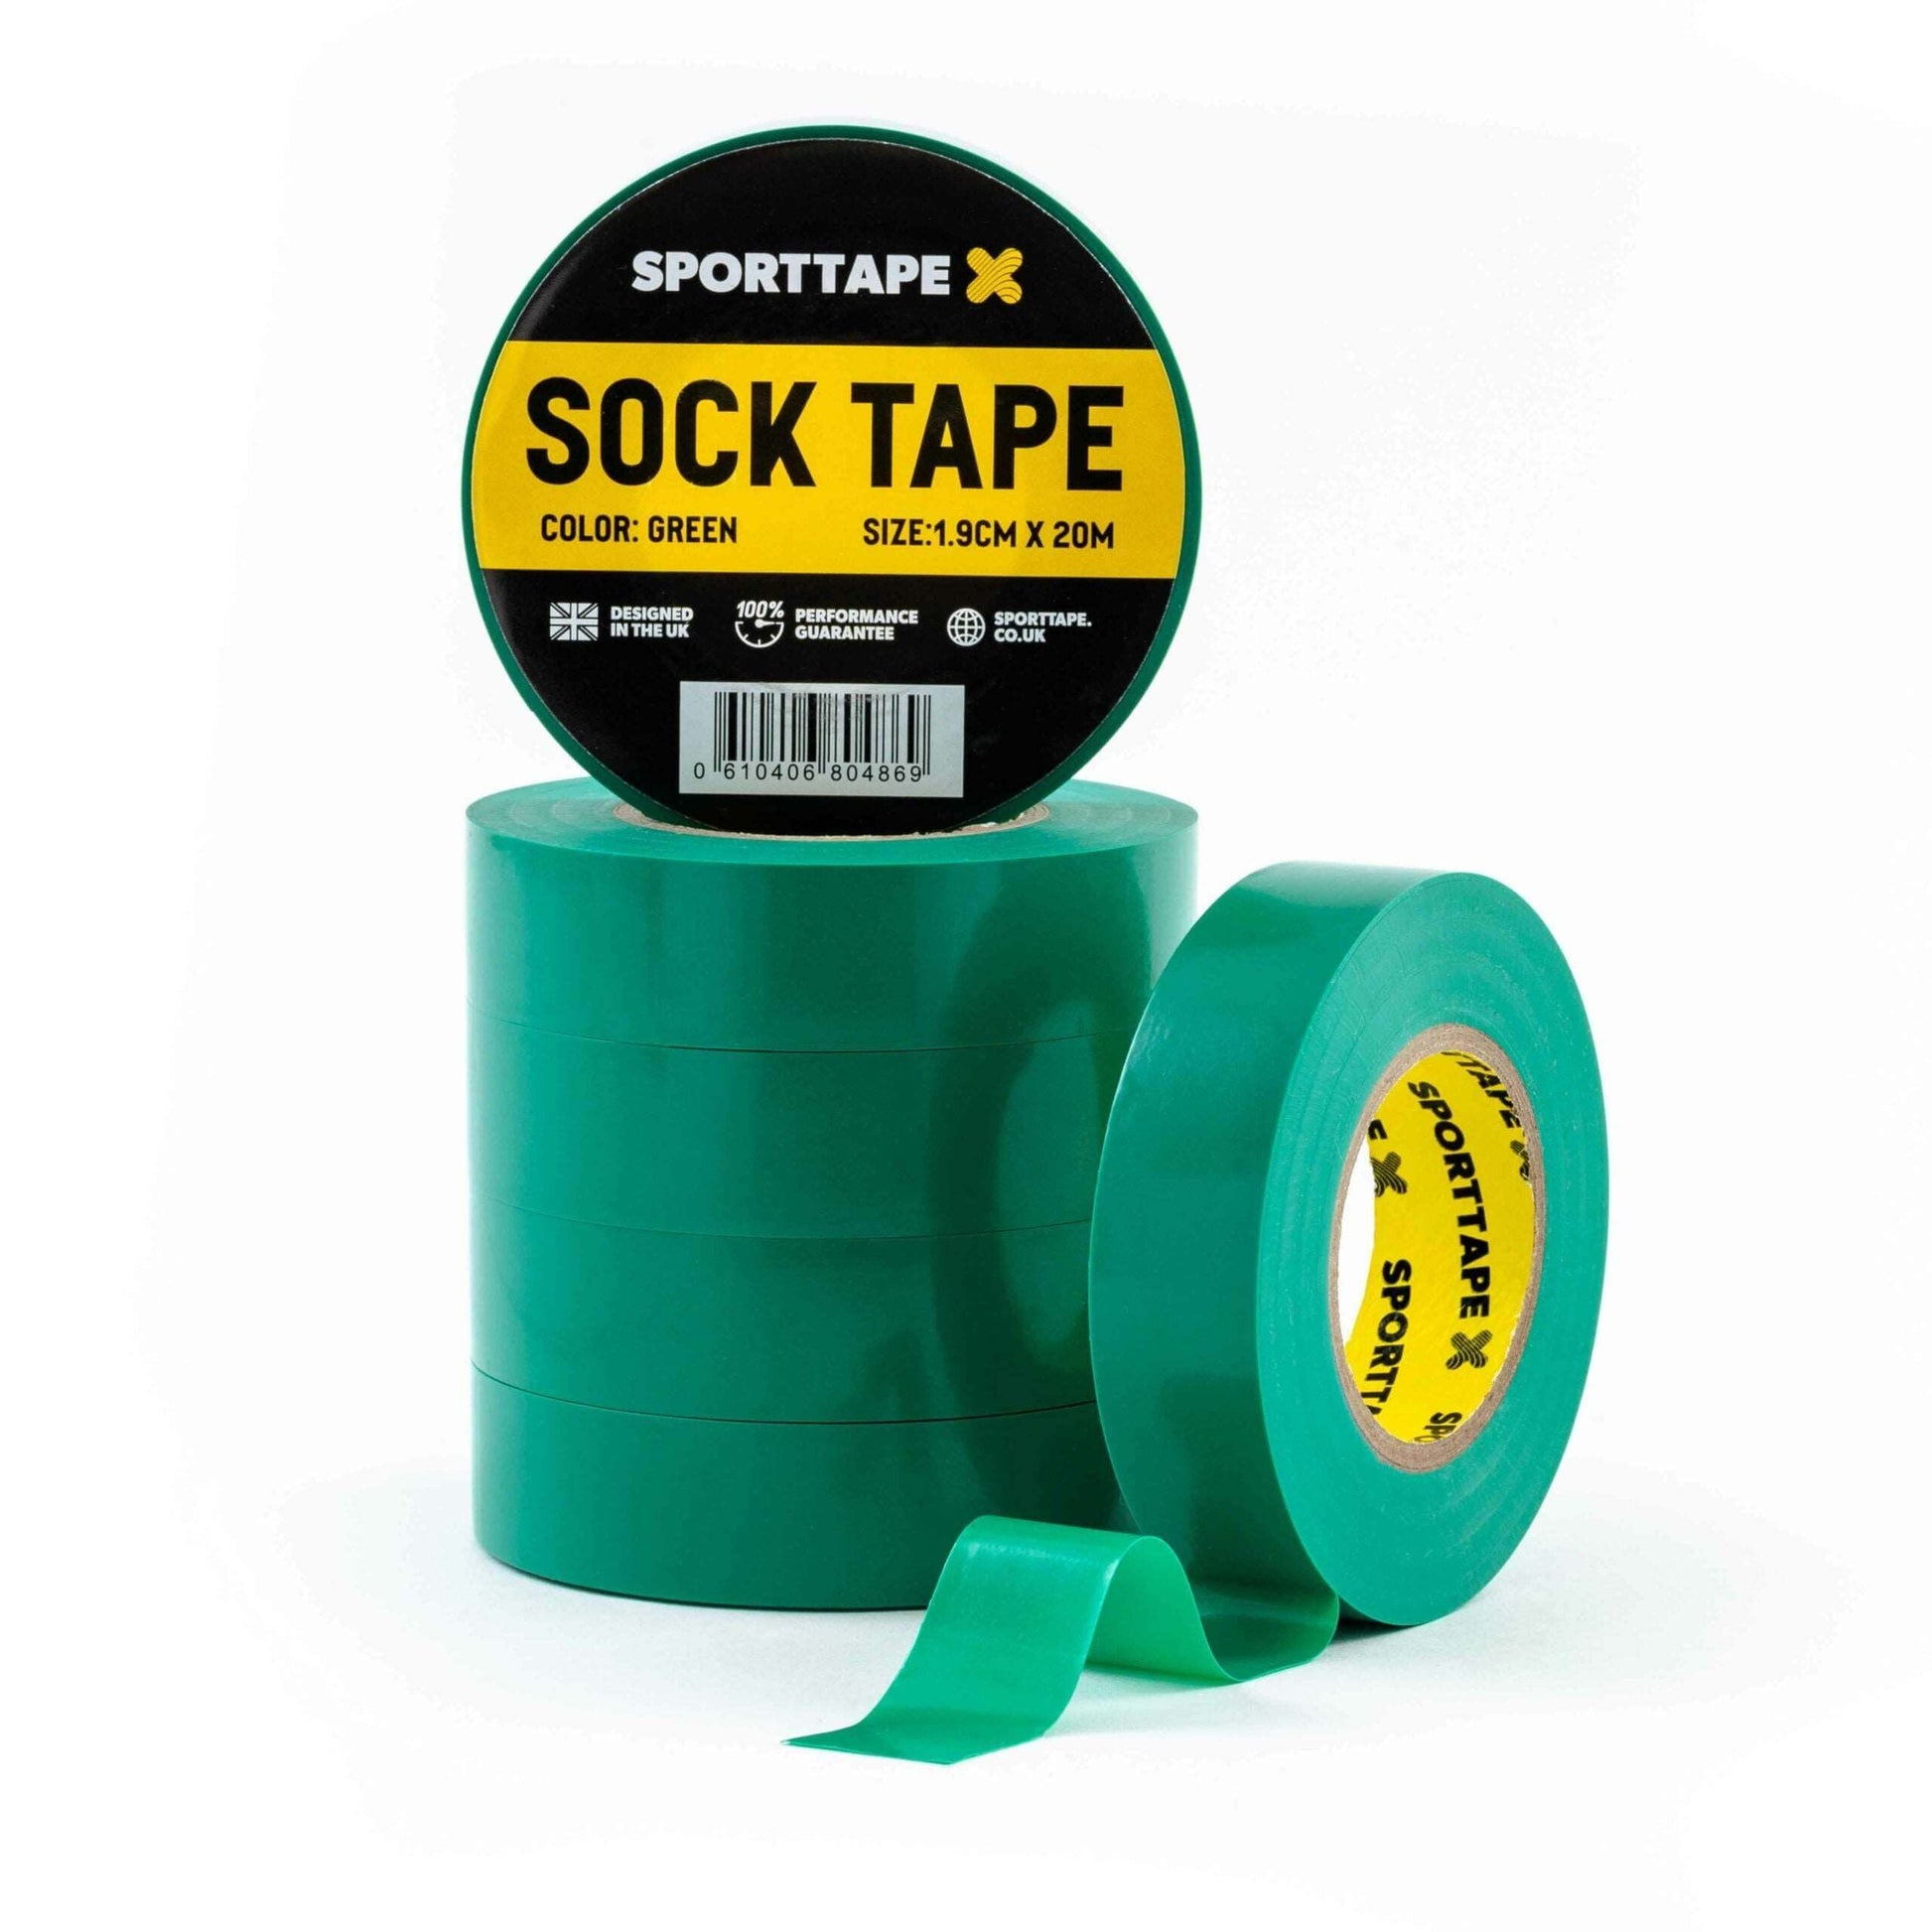 Sock Tape: Secure and Supportive Taping Solution for Sports and Athletics in green